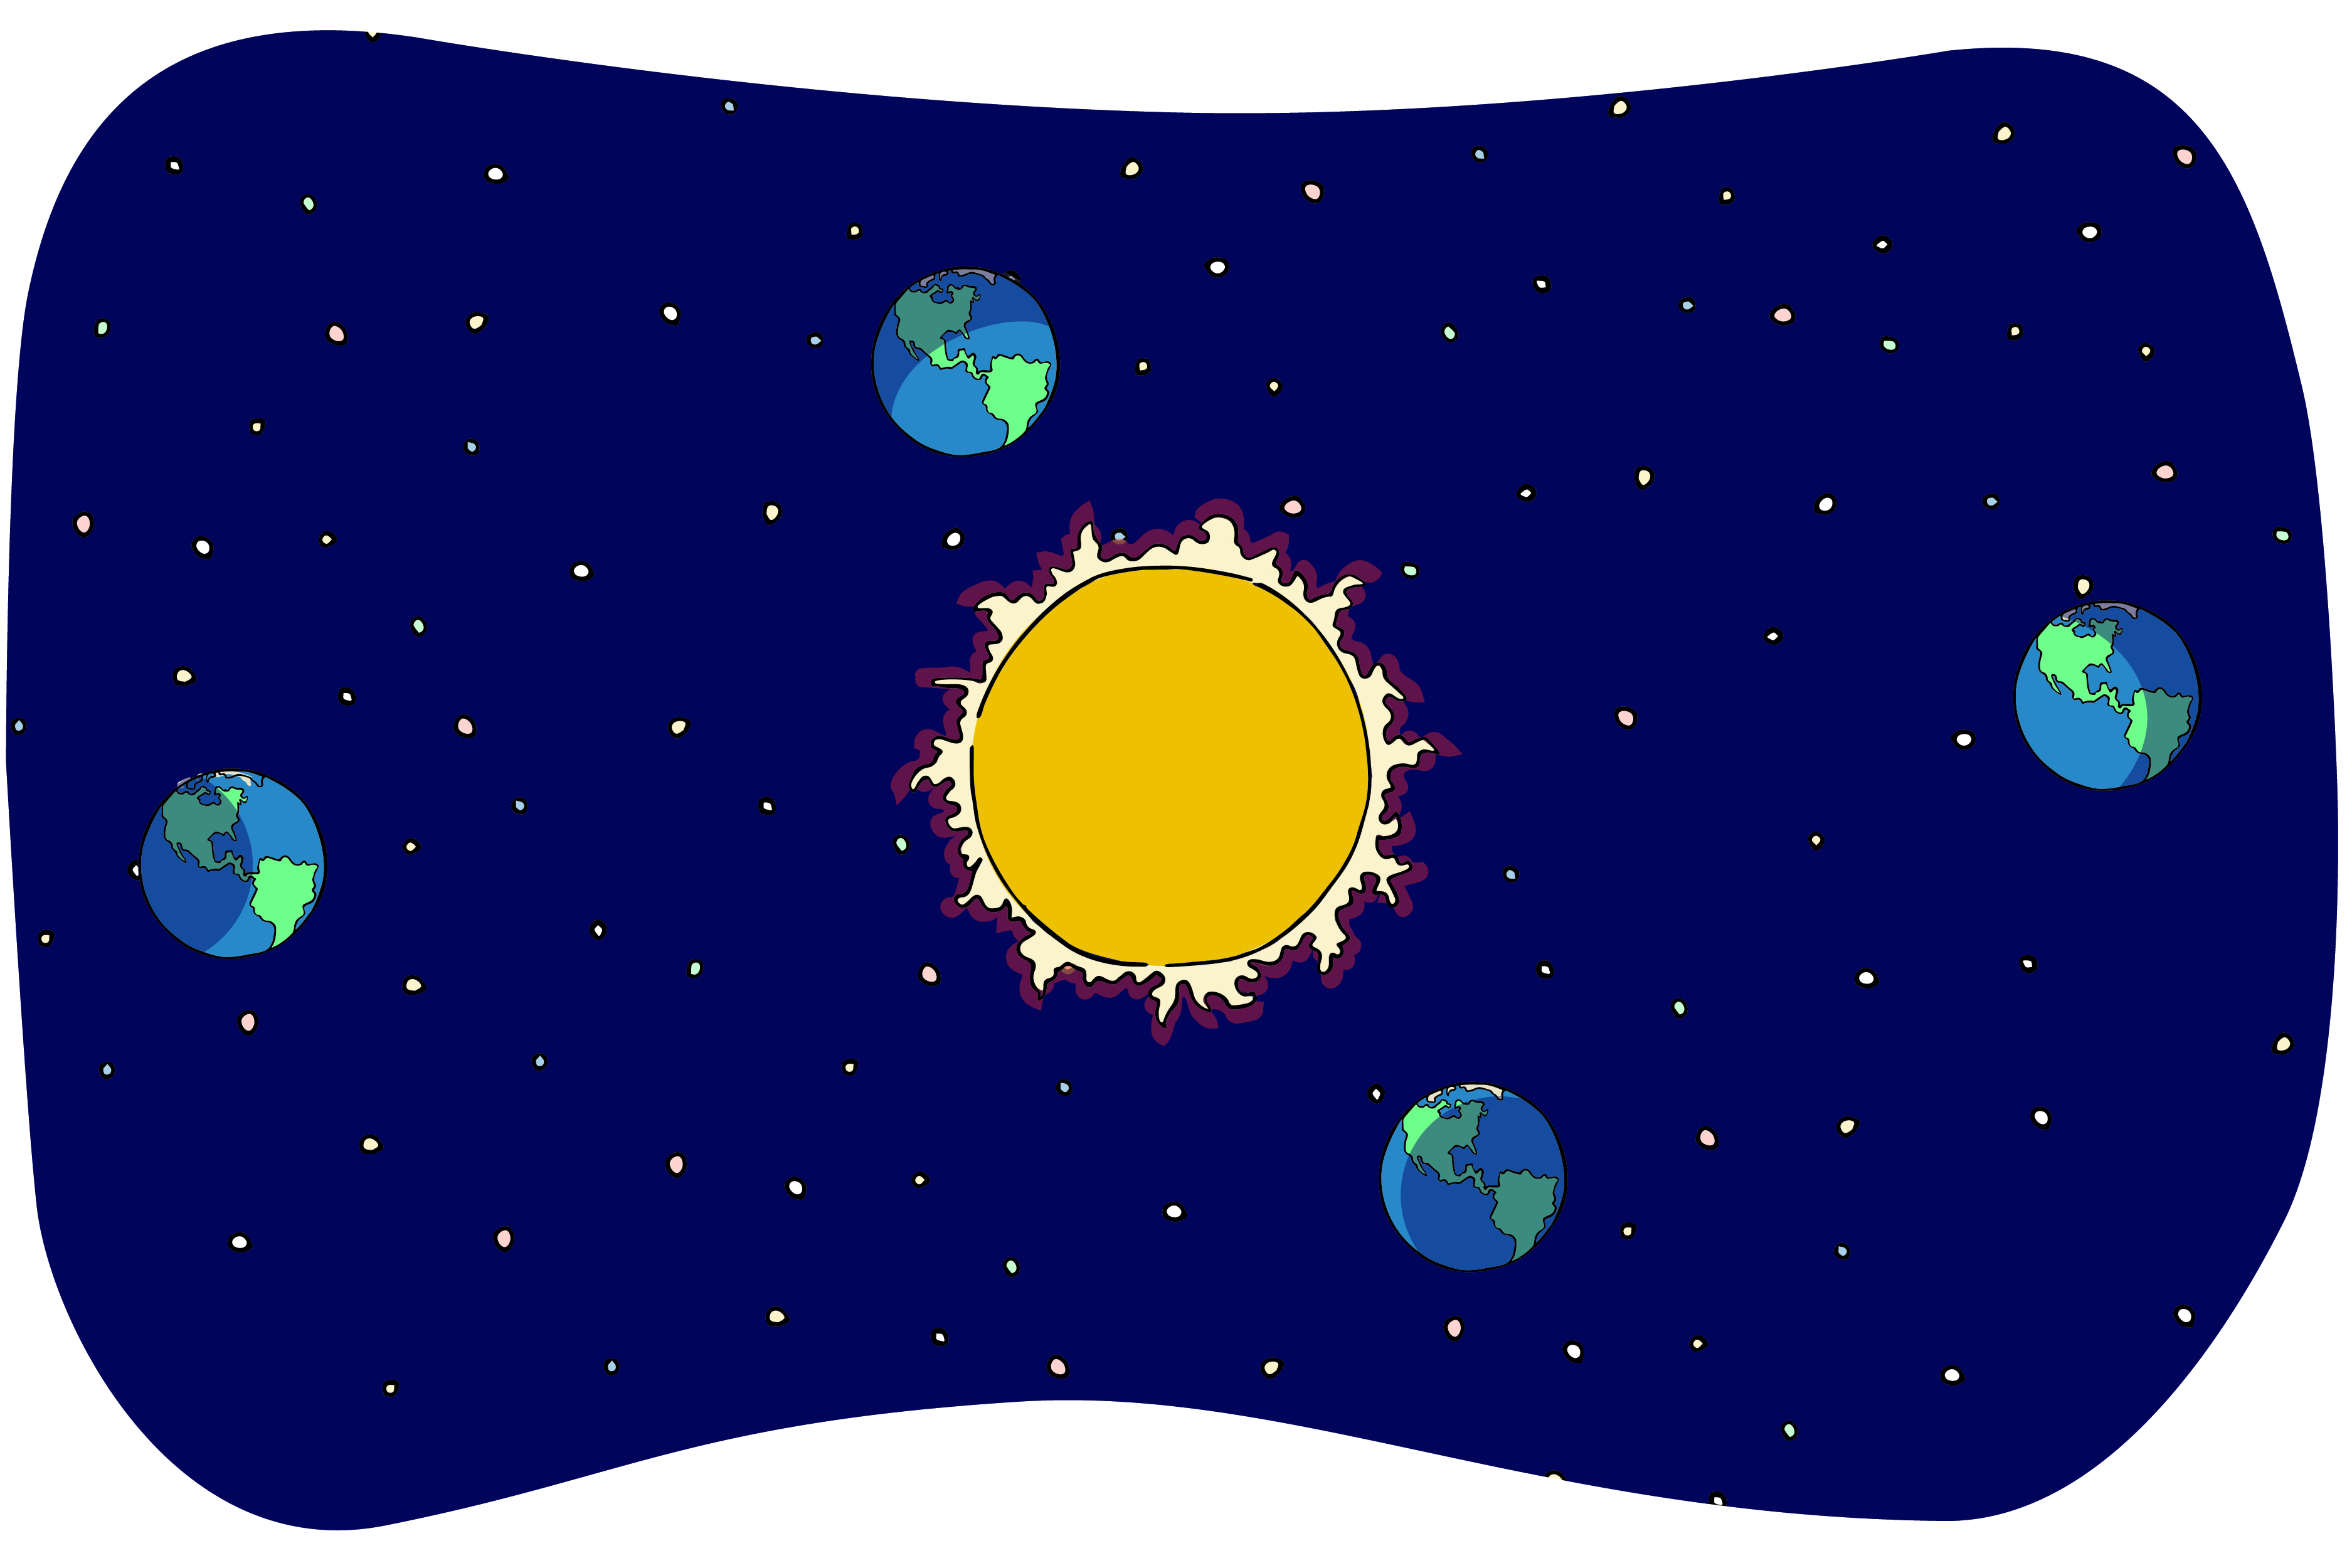 A colorful vector illustration of the Sun with a depiction of the Earth orbiting around it.